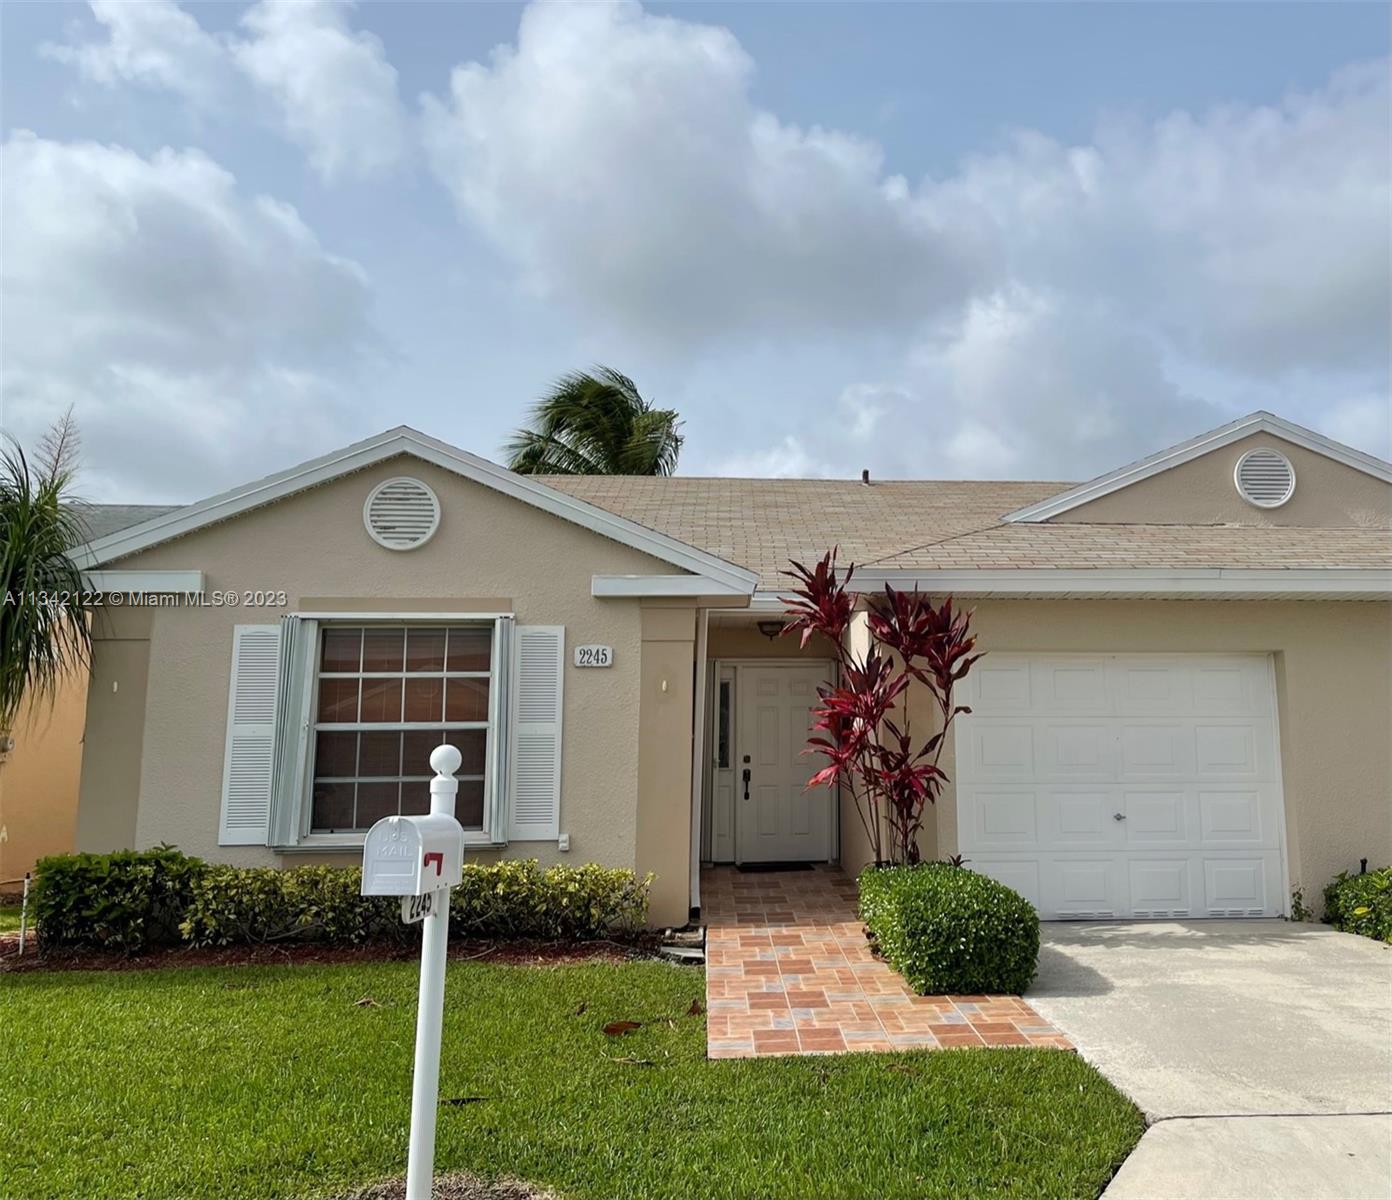 COZY 2 BR/ 2 BA HOME W/ 1 CAR GARAGE IN DESIRED GATED COMMUNITY OF NORTH GATE @ KEYS GATE. THIS HOME OFFERS AN OPEN FLOORPLAN W/ LAMINATE FLOORING IN LIVING AREA, SPLIT BEDROOMS & LARGE WRAP AROUND SCREENED PATIO. AREA RENT INCLUDES; ATT UVERSE CABLE & INTERNET, ALARM, SECURITY, TRASH, LAWN MAINTENANCE AND ACCESS TO ROYAL PALM CLUBHOUSE.